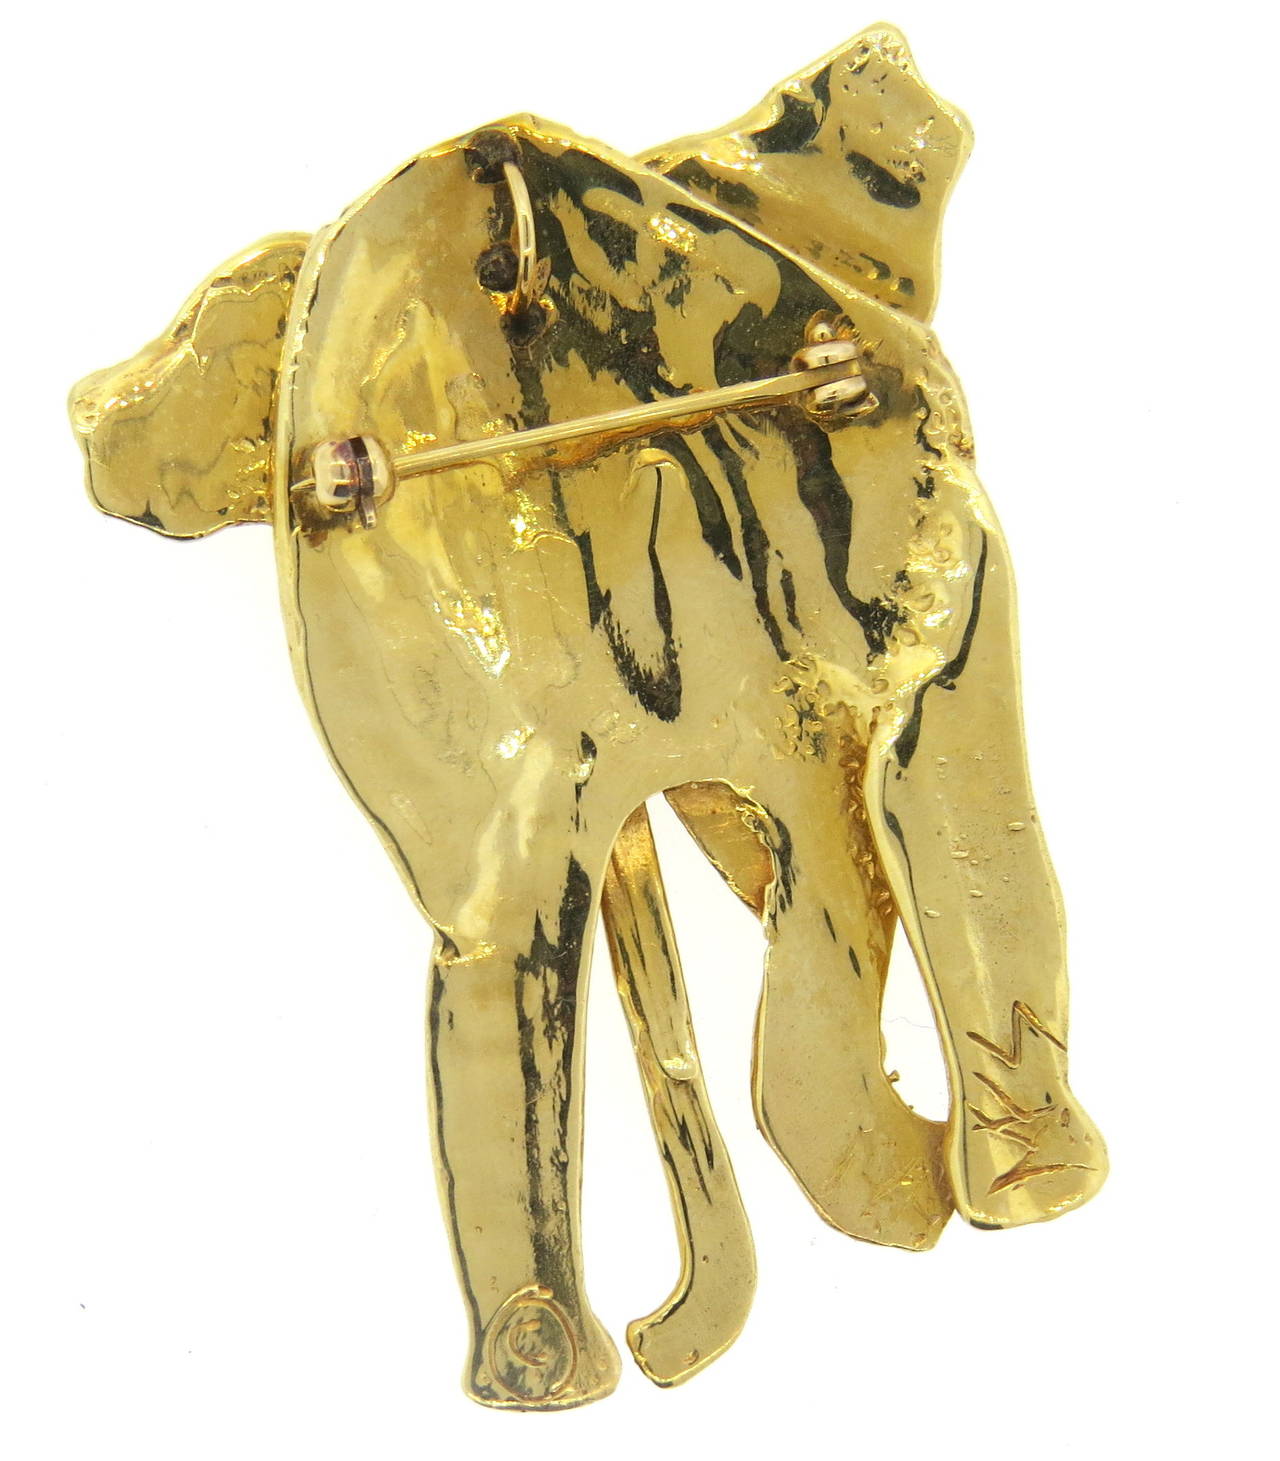 Unusual 14k gold elephant brooch pendant, with sapphire eyes by Mia Fonssagrives-Solow. Brooch is 54mm x 43mm. Marked MFS,14k. weight - 34.5 grams